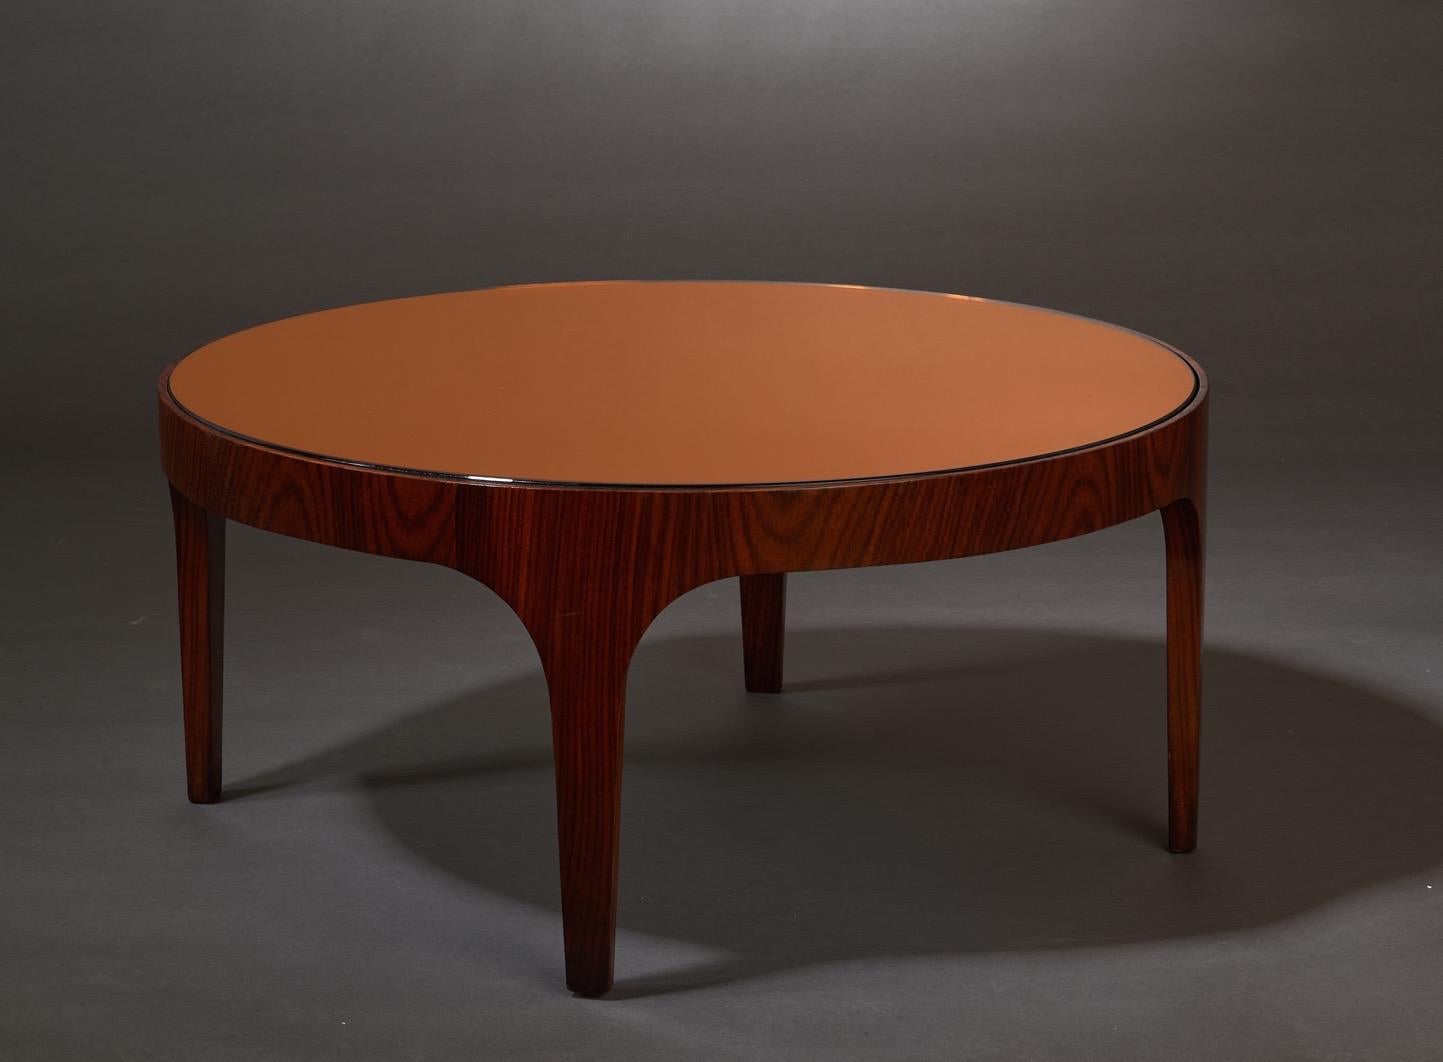 Max Ingrand (1908 - 1969)

A rare and exceptionally pure Model 1774 round coffee table by Max Ingrand for Fontana Arte. In wood with a circular top in burnt umber mirrored glass, resting on an elegantly curved base raised on tapering legs. 

Italy,